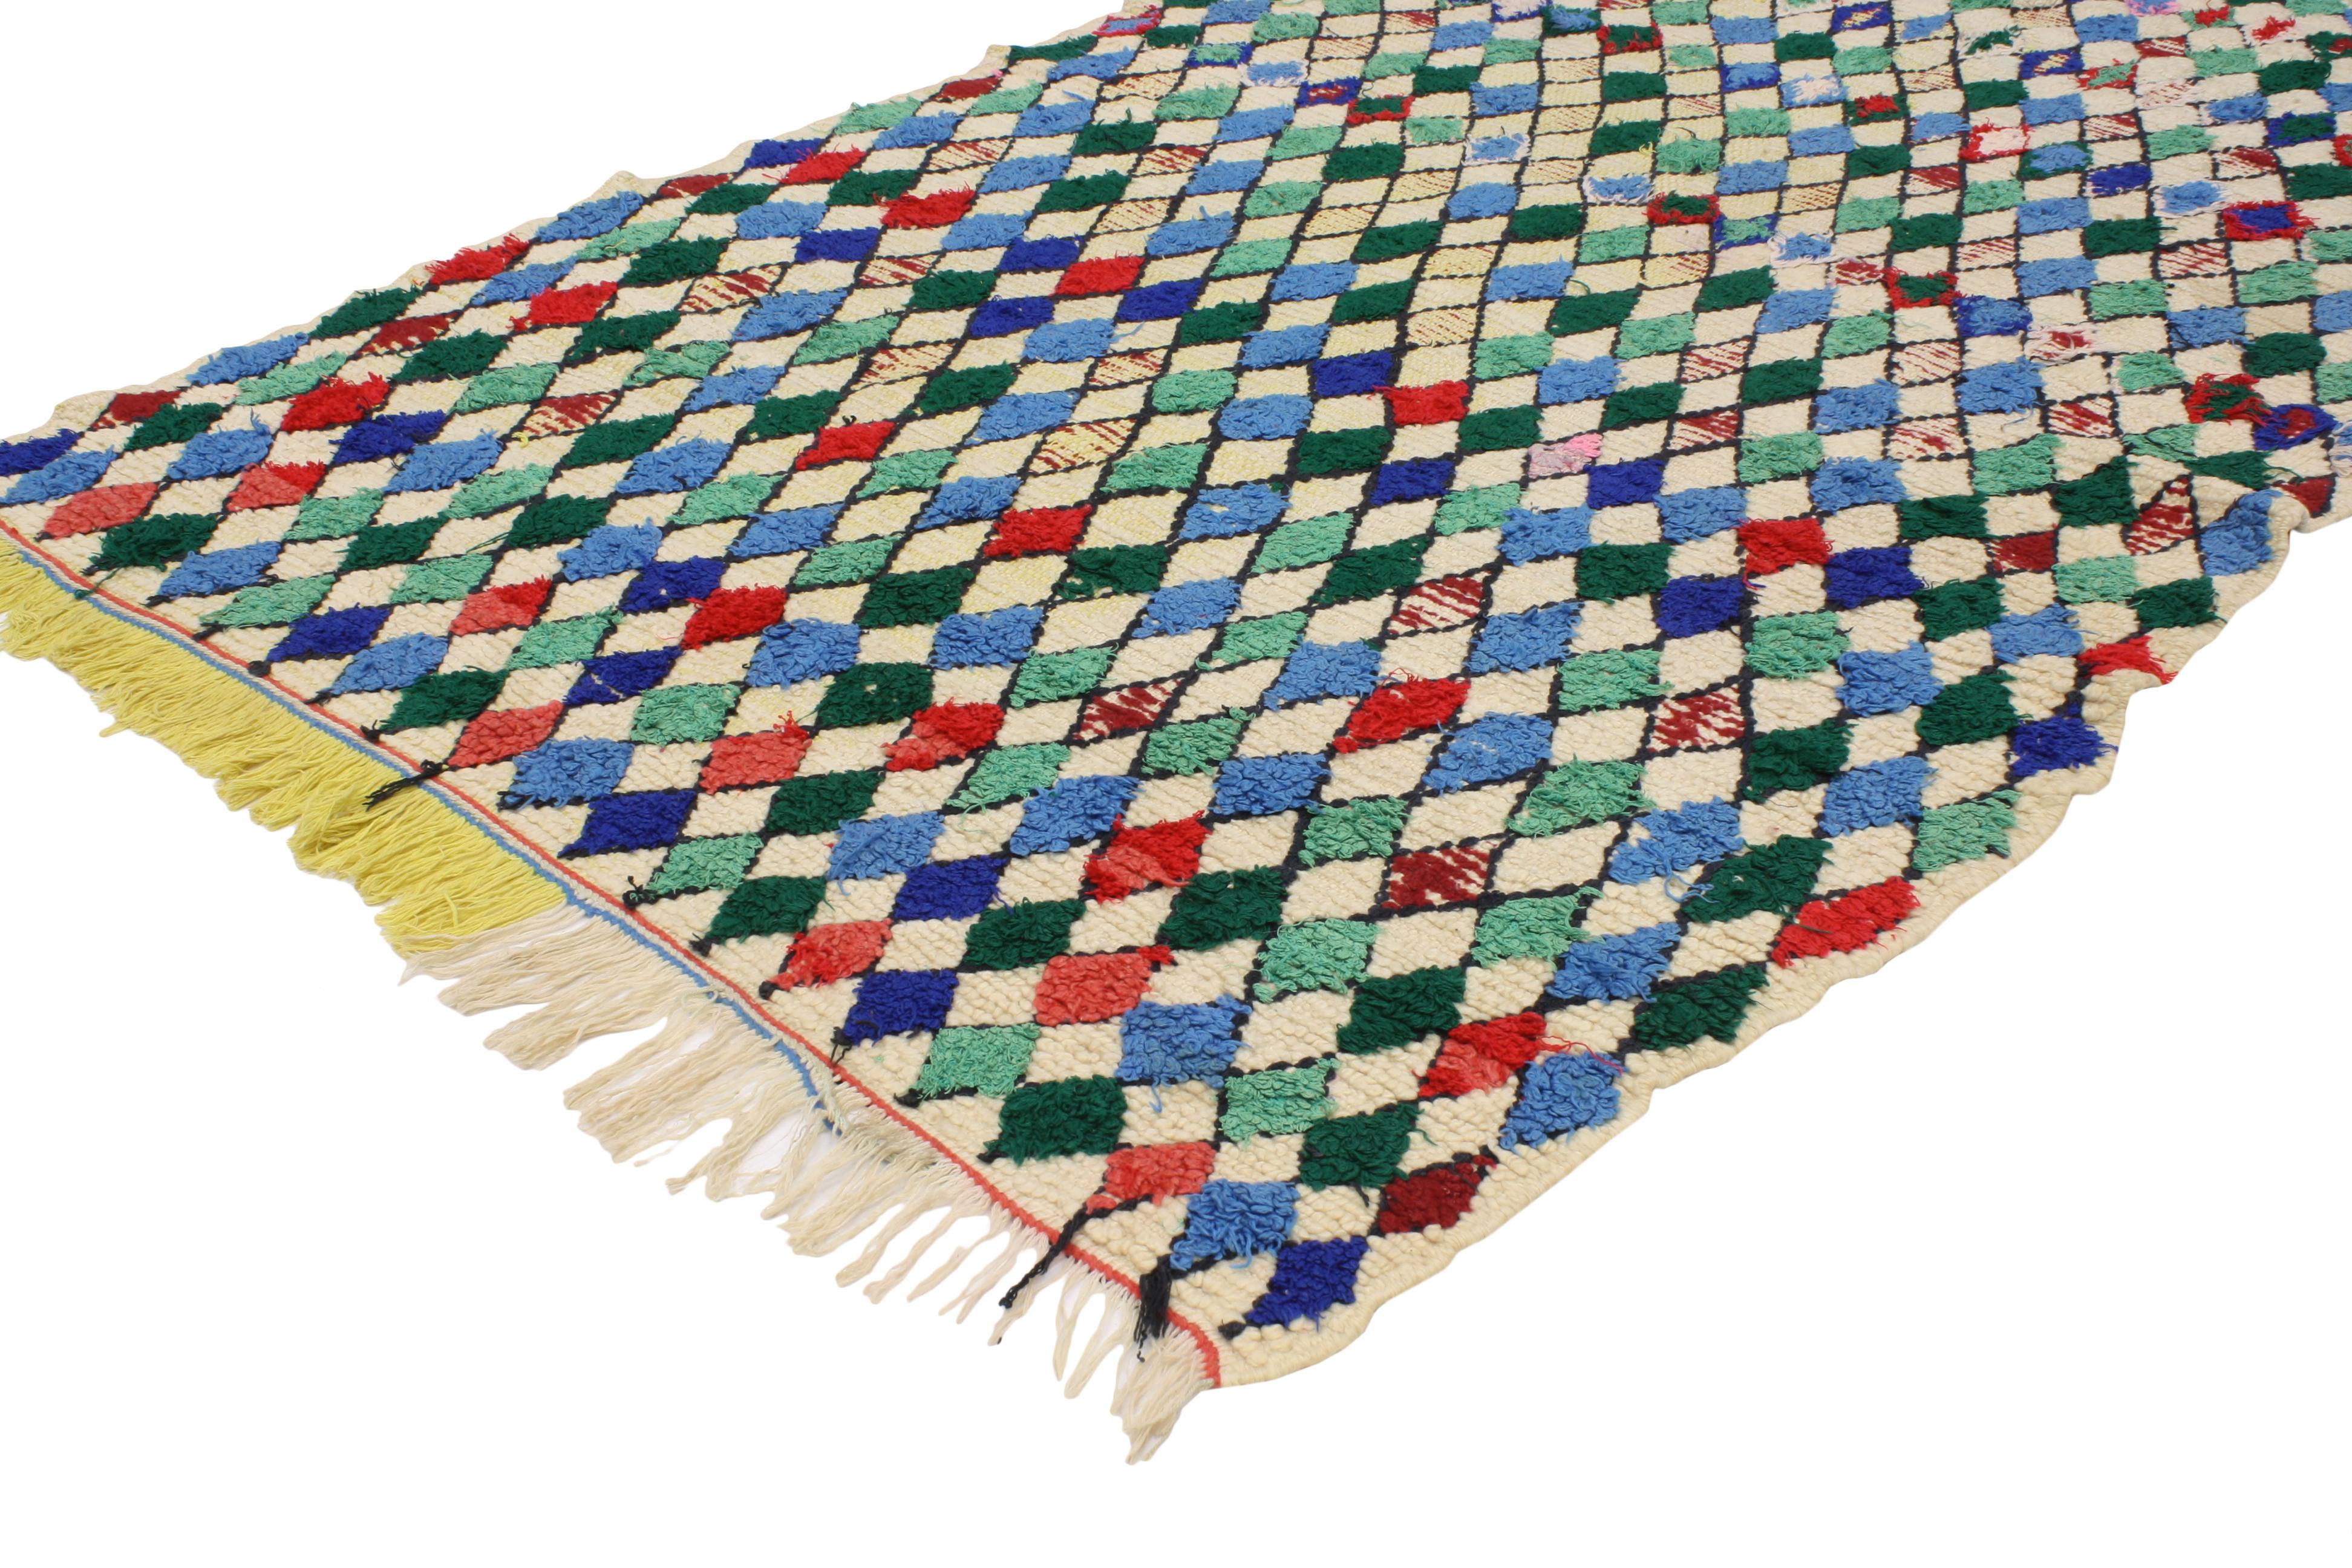 20488 Vintage Berber Moroccan Azilal Rug, 03’09 x 06’06. With meticulous craftsmanship, this hand-knotted wool vintage Moroccan Azilal rug showcases a mesmerizing diamond trellis pattern, where an all-over colorful lozenge lattice adorns an abrashed